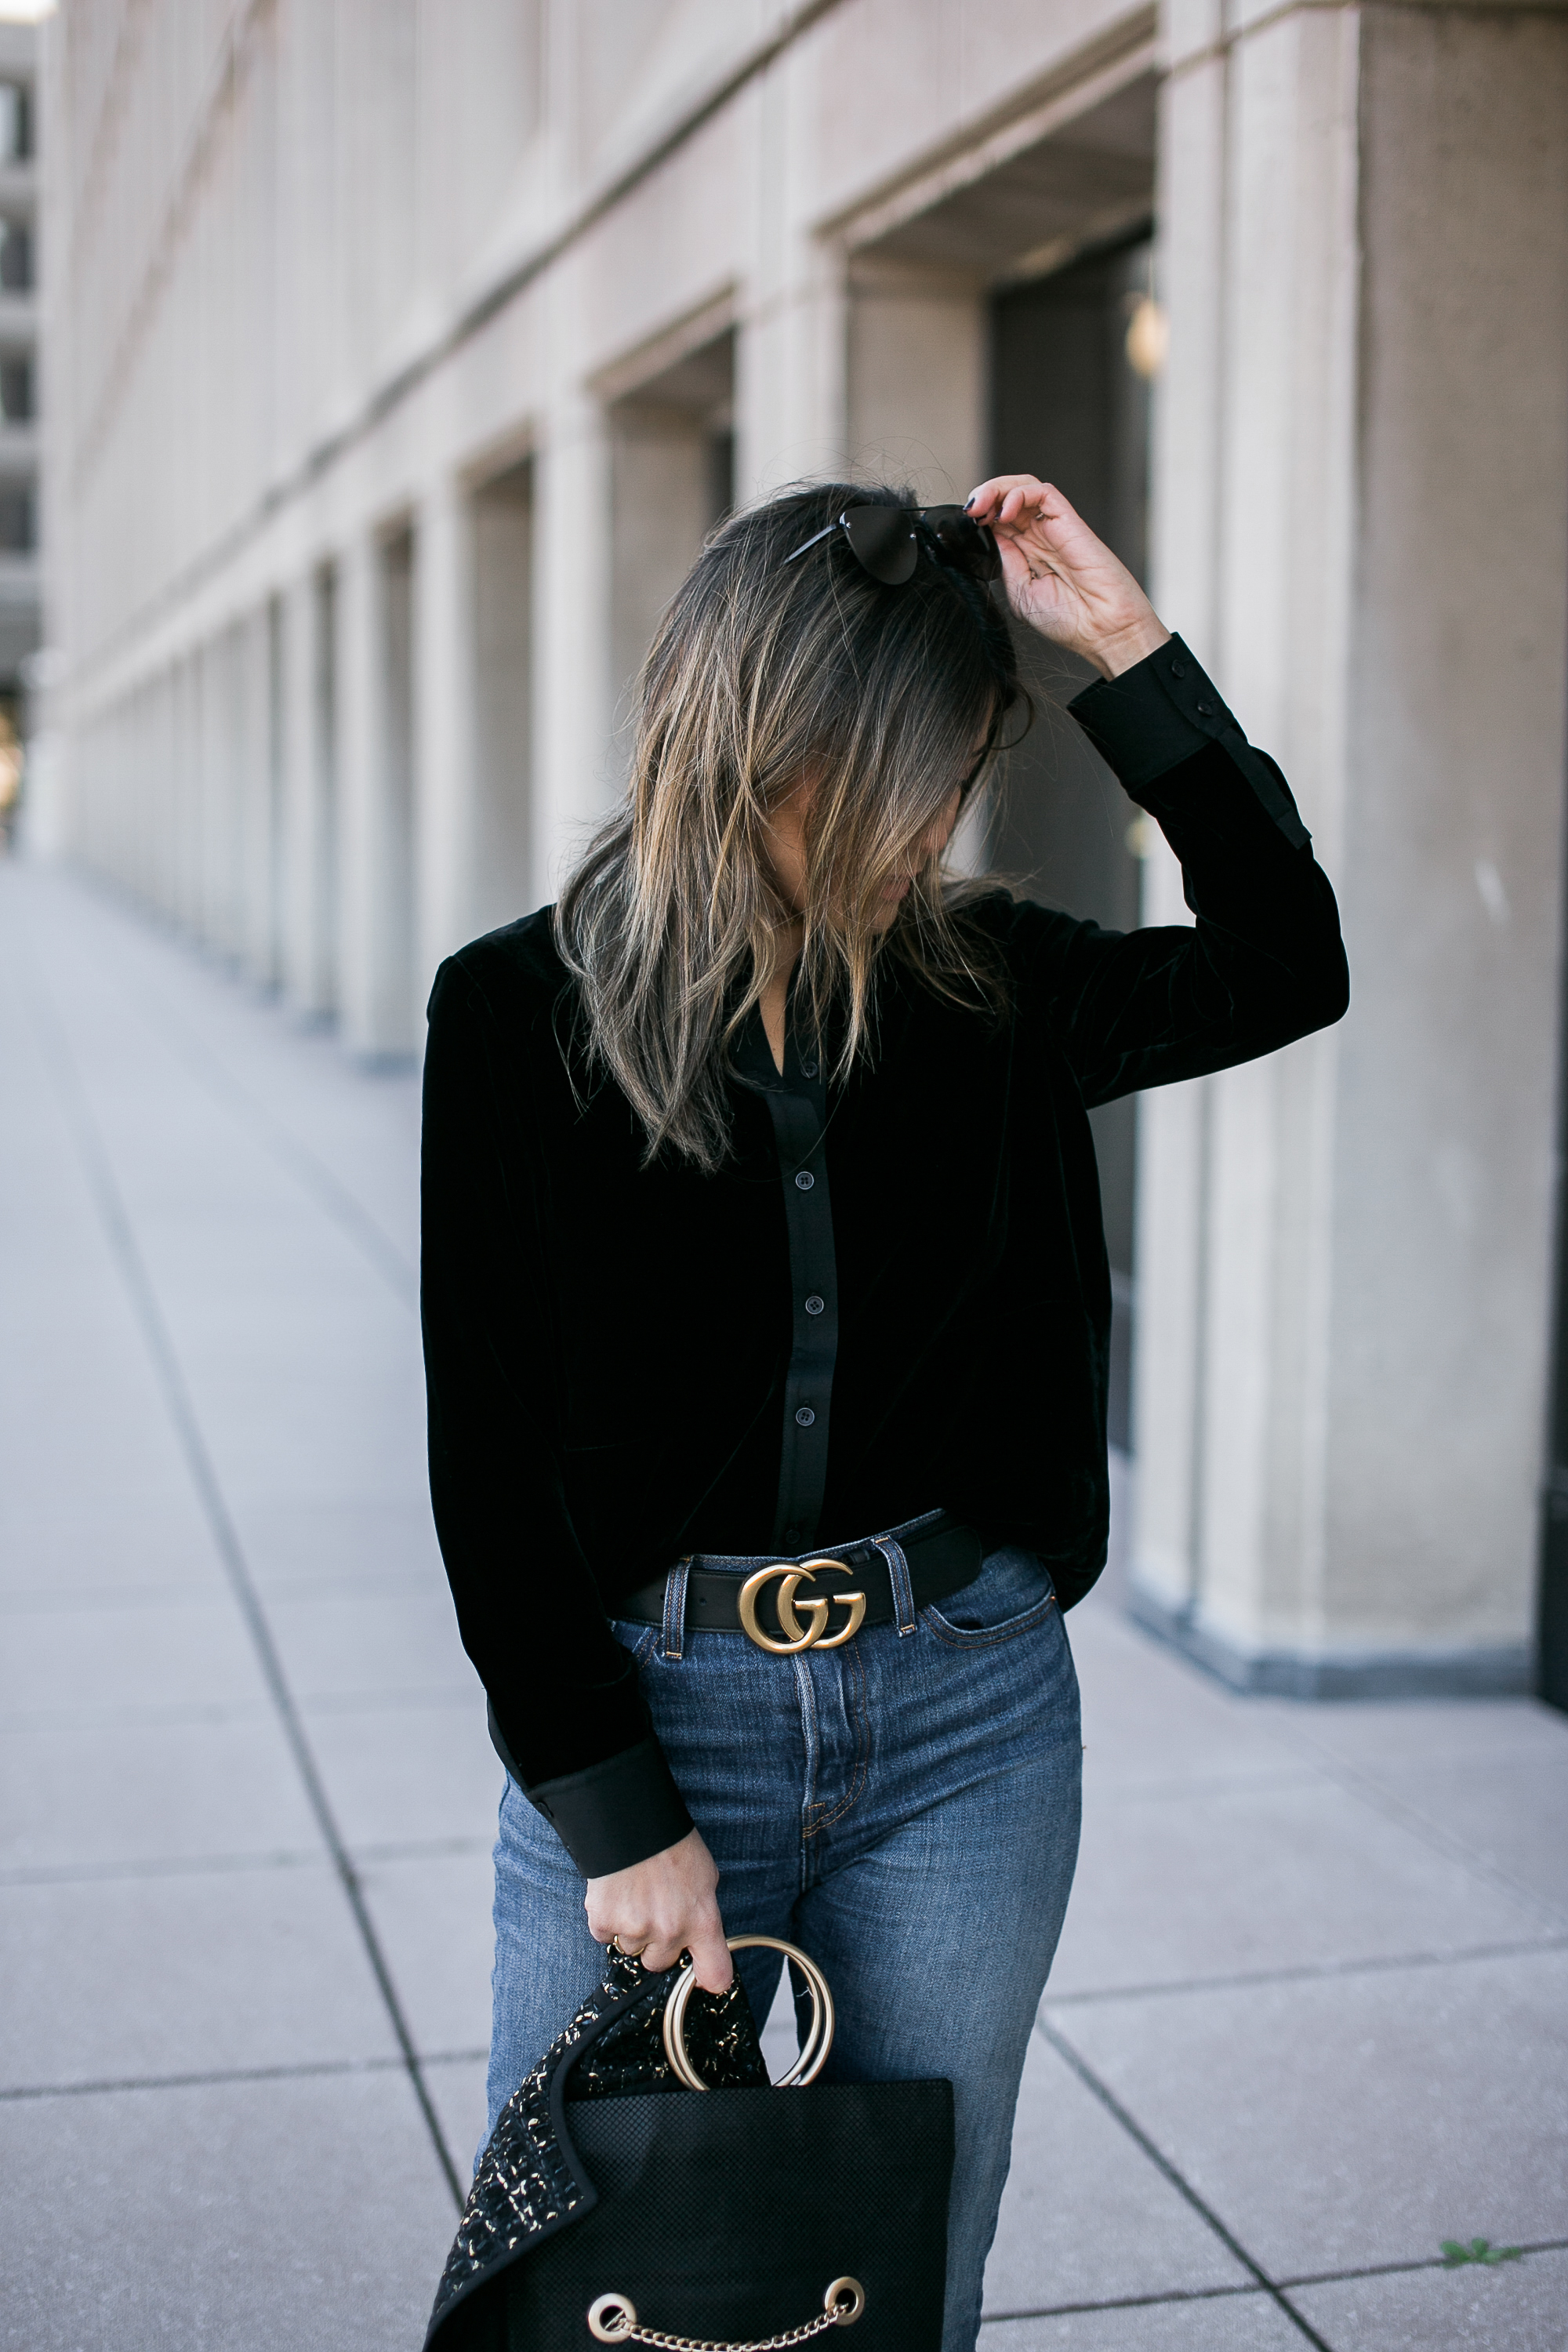 Blogger Sara Azani of Style MBA wearing a black Gucci leather belt with double G buckle, 5 Disc Choker Necklace, Whiting & Davis Fold-Over Tote, LEVI'S Wedgie Skinny Jean, Lafayette 148 New York tweed jacket, and Vince portia point toe pump as part of her black and gold look in front of a stone building in Washington, DC.